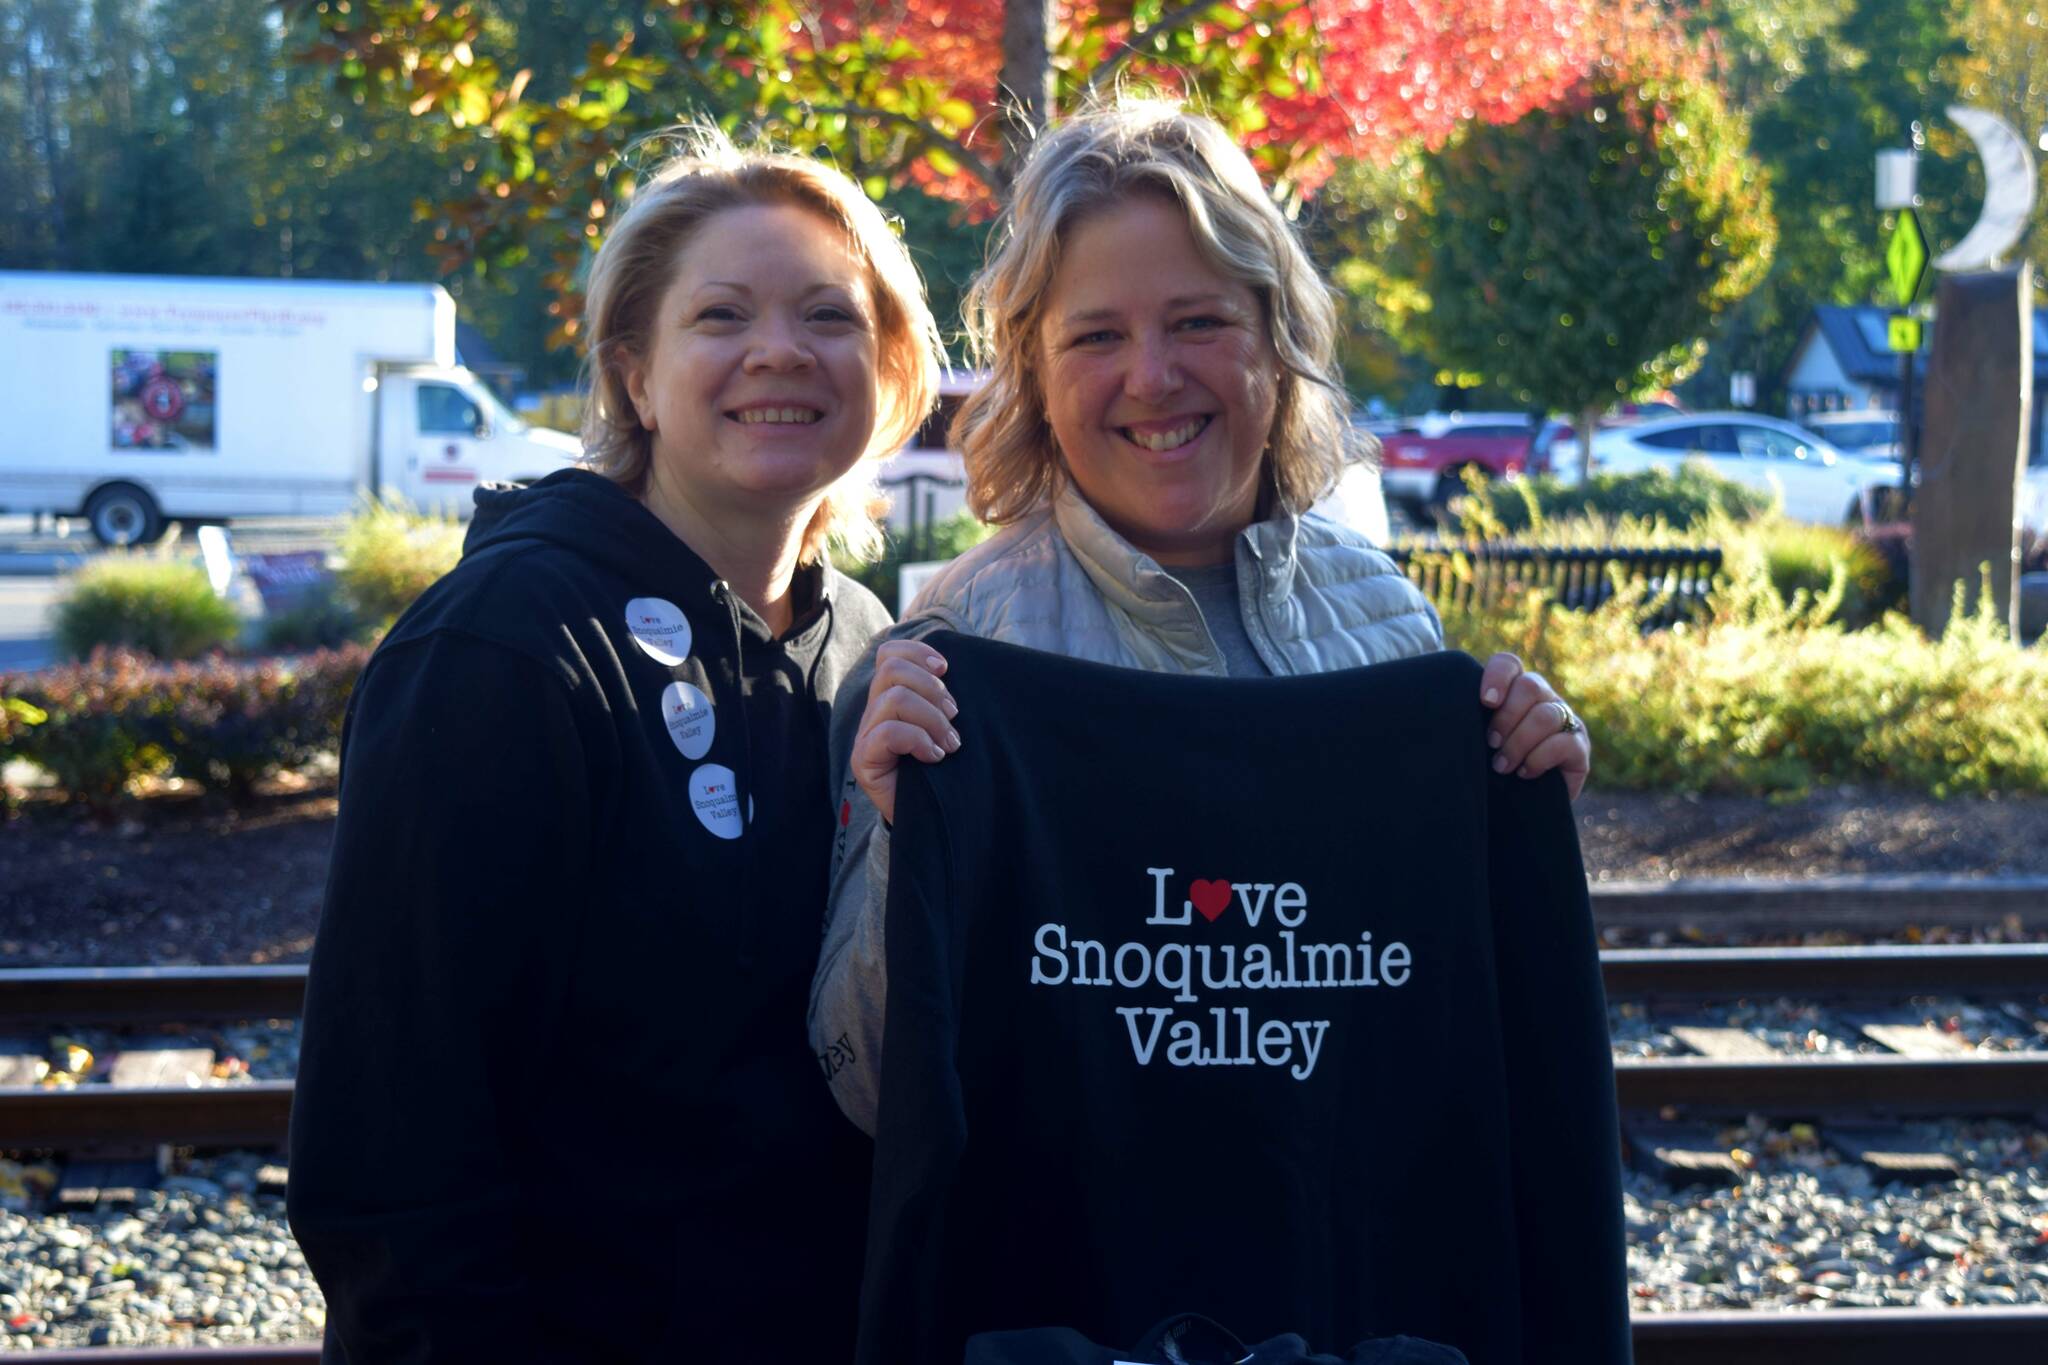 Photos by Conor Wilson/Valley Record
Snoqualmie Trading Co. Owners Heather Dean (left) and Cheri Buell sell Love Snoqualmie Valley merch at Volunteer Day. Half of the proceeds went back into the community, Dean said.